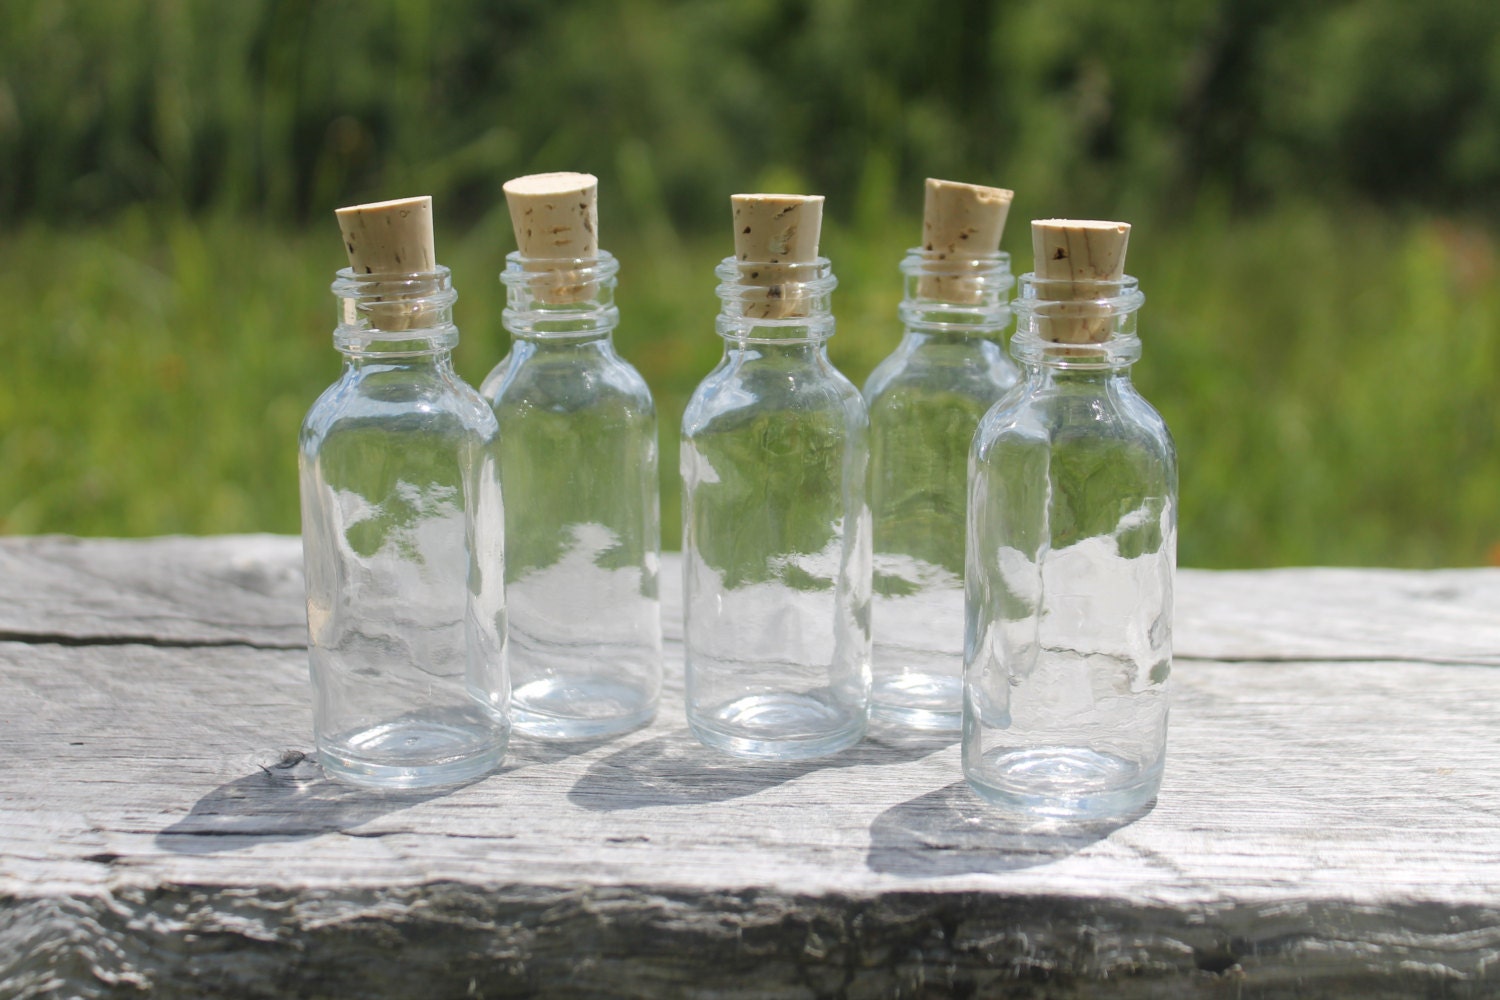 EOI Small clear glass bottle with cork - Bound to be Different